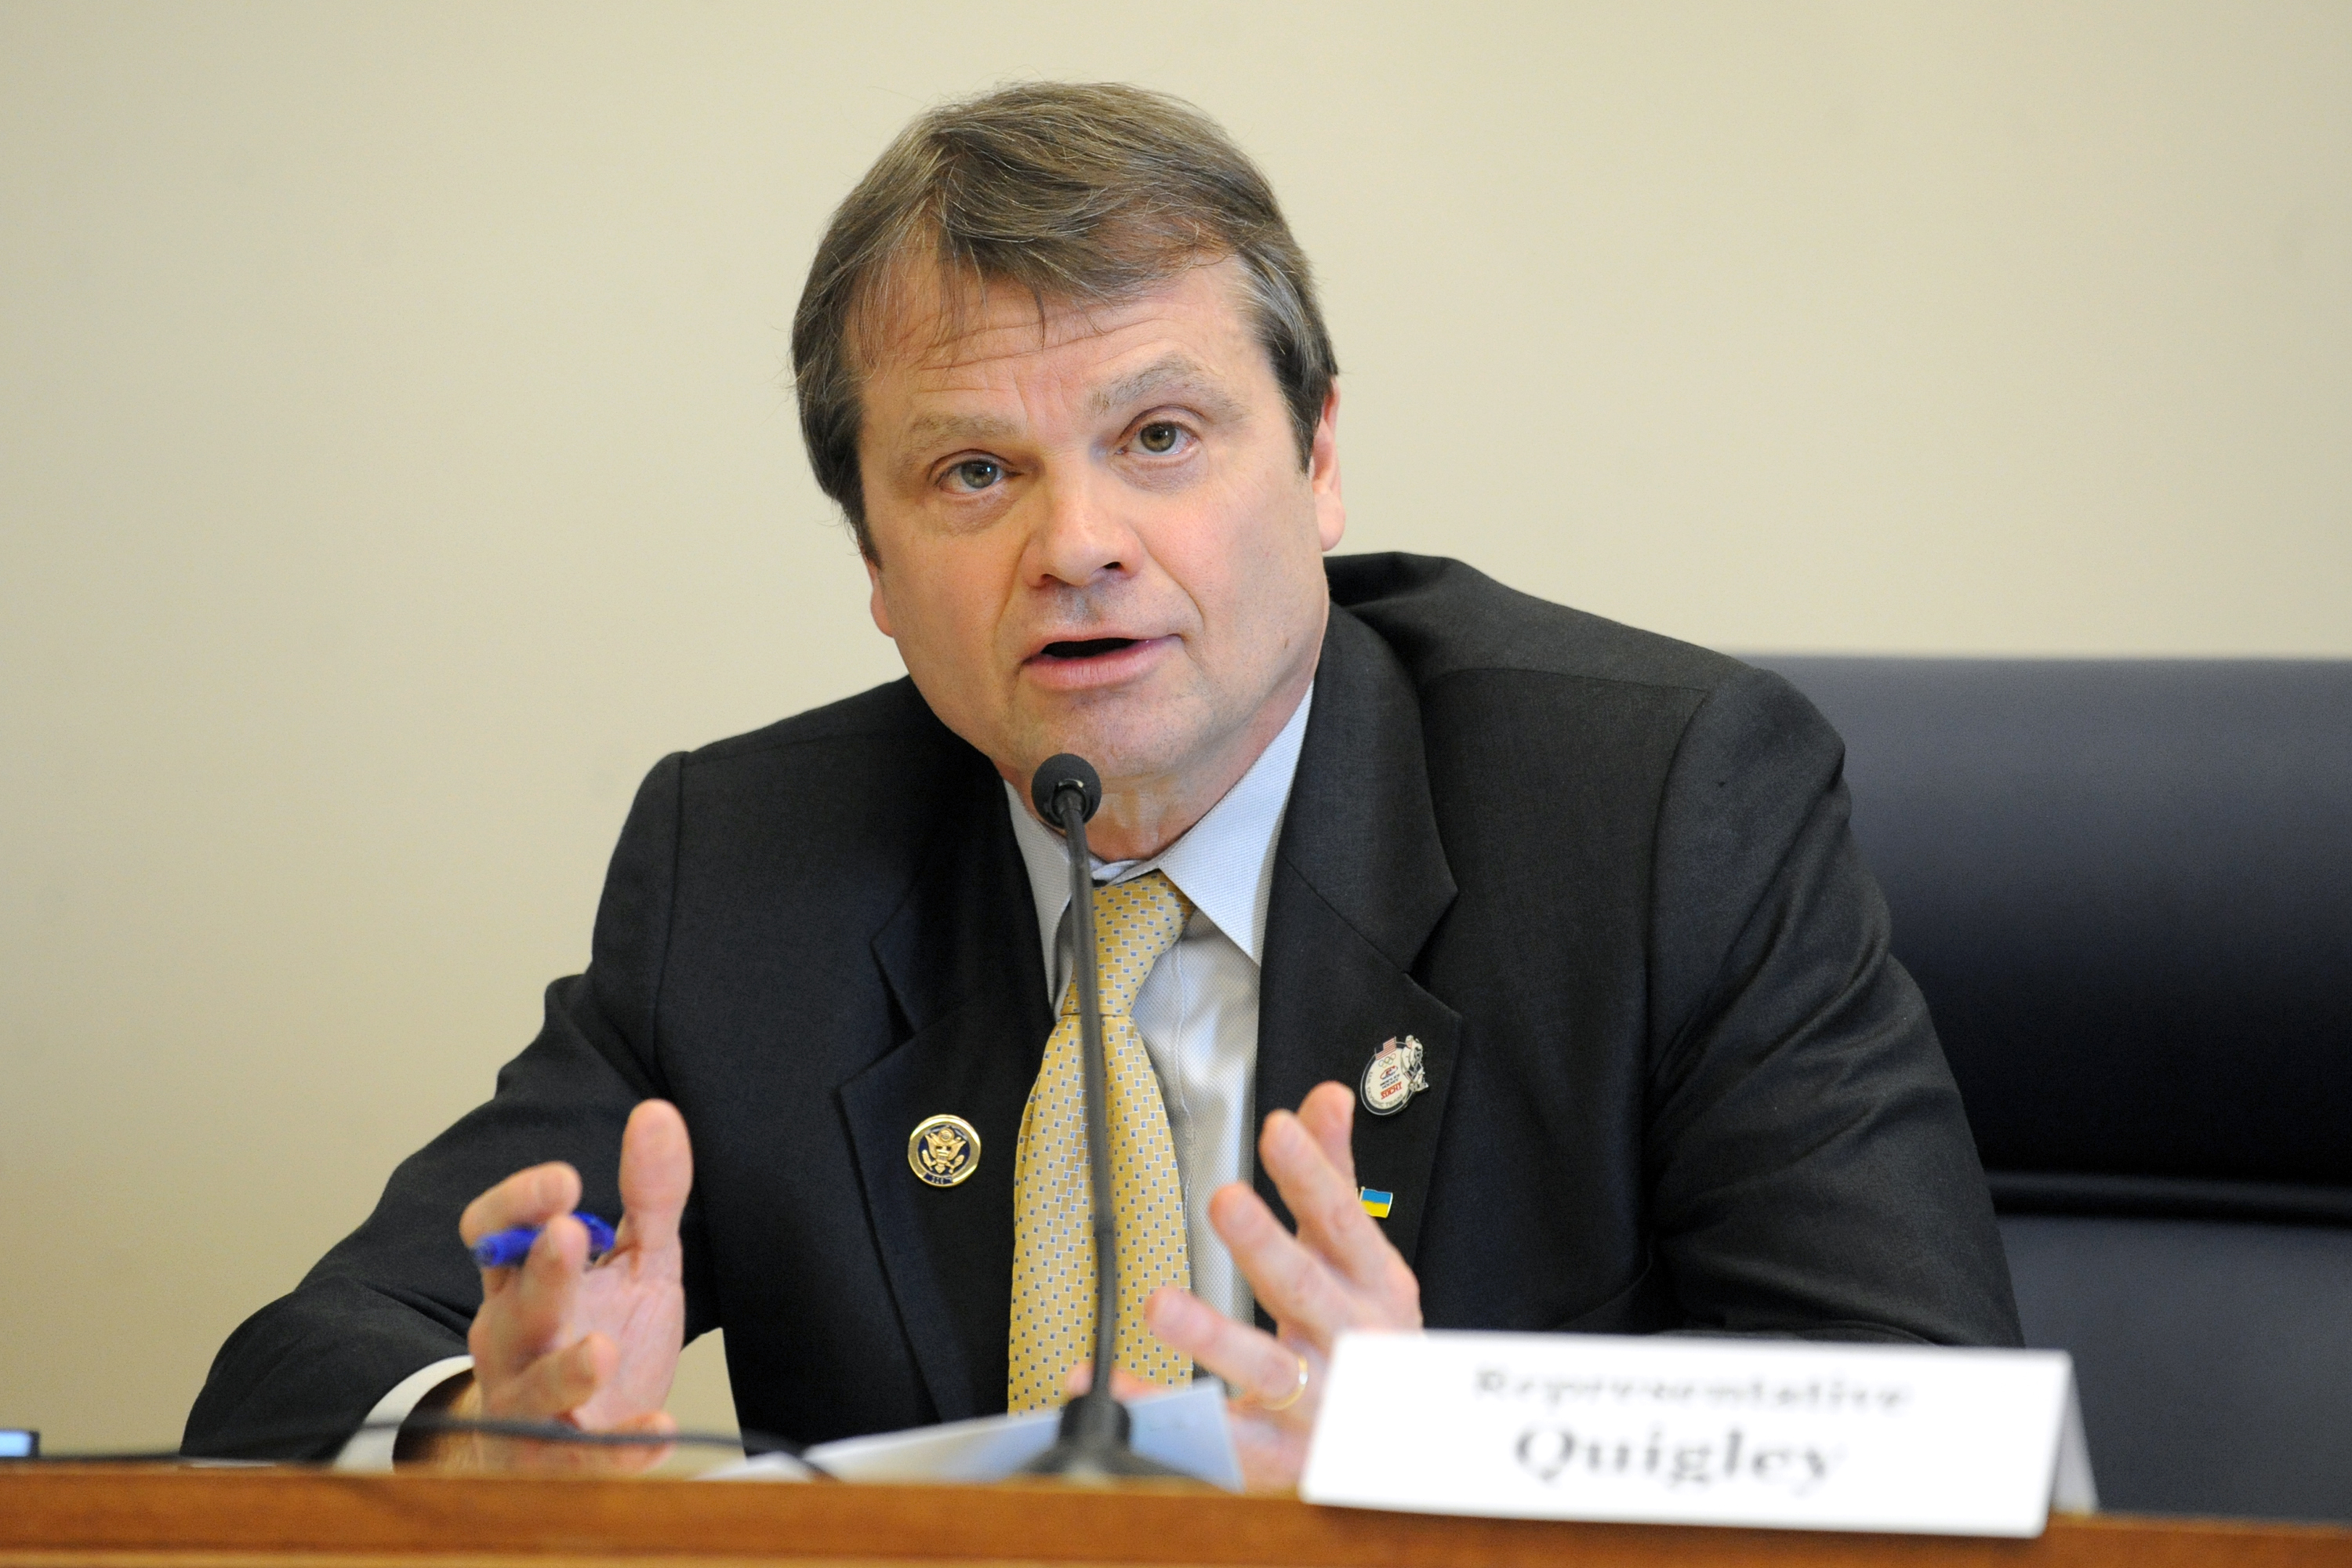 Rep. Mike Quigley (D-IL) speaks during Congressional Hockey Caucus in the Rayburn House Office Building March 5, 2014 in Washington, DC. (Mitchell Layton—NHLI via Getty Images)